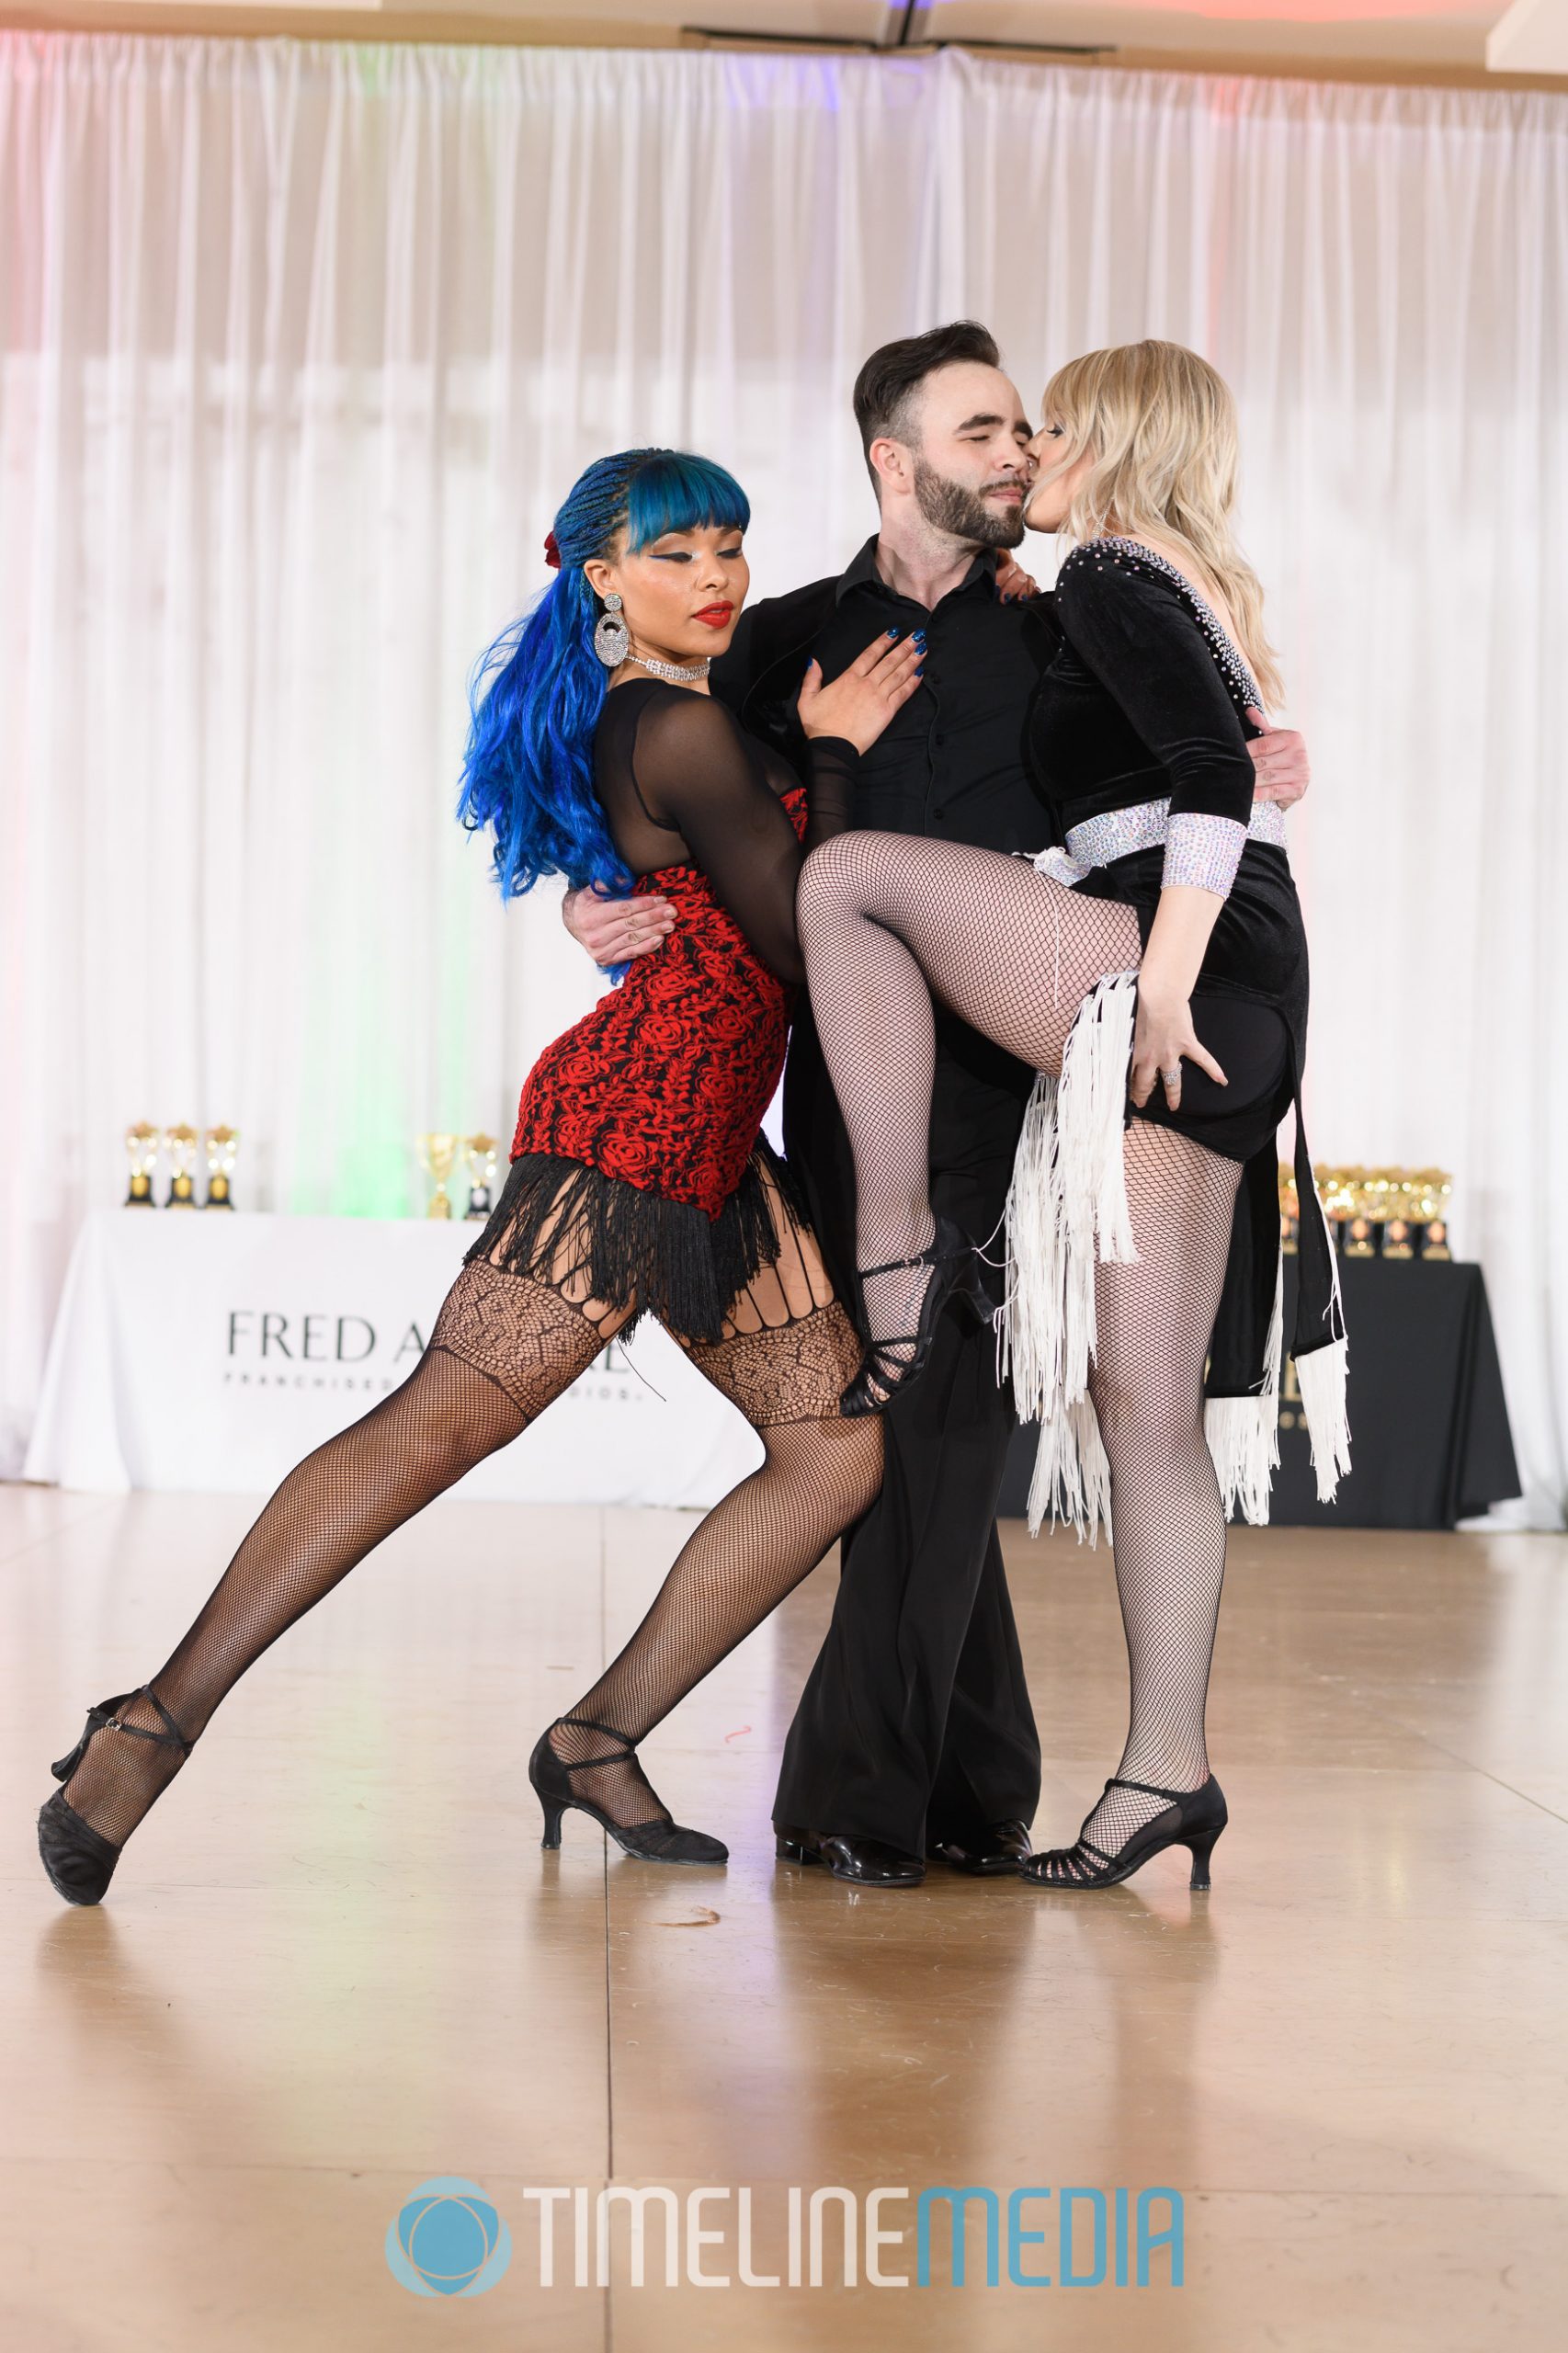 2019 FADS Spring Fling Fred Astaire Frederick Professional Show ©TimeLine Media